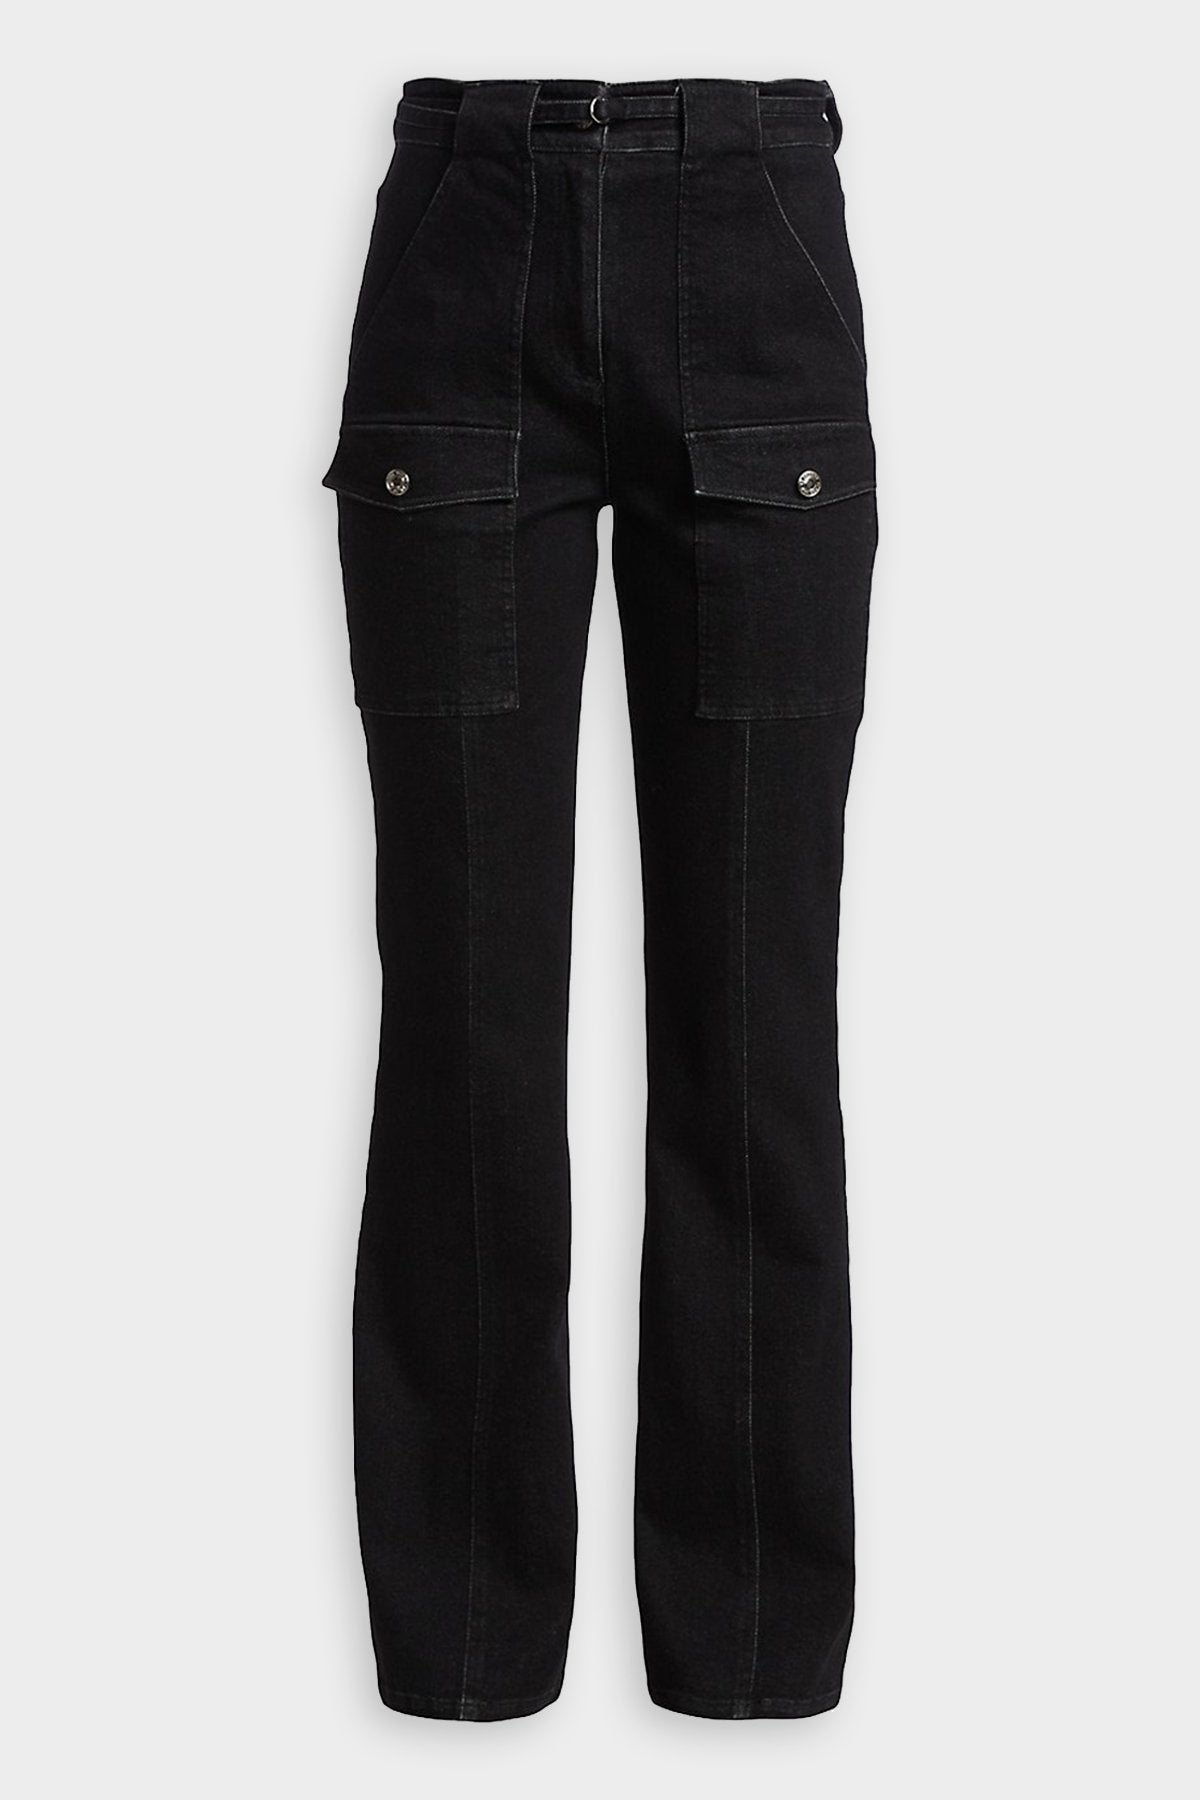 Aspen High Waisted Flare Pant in Black